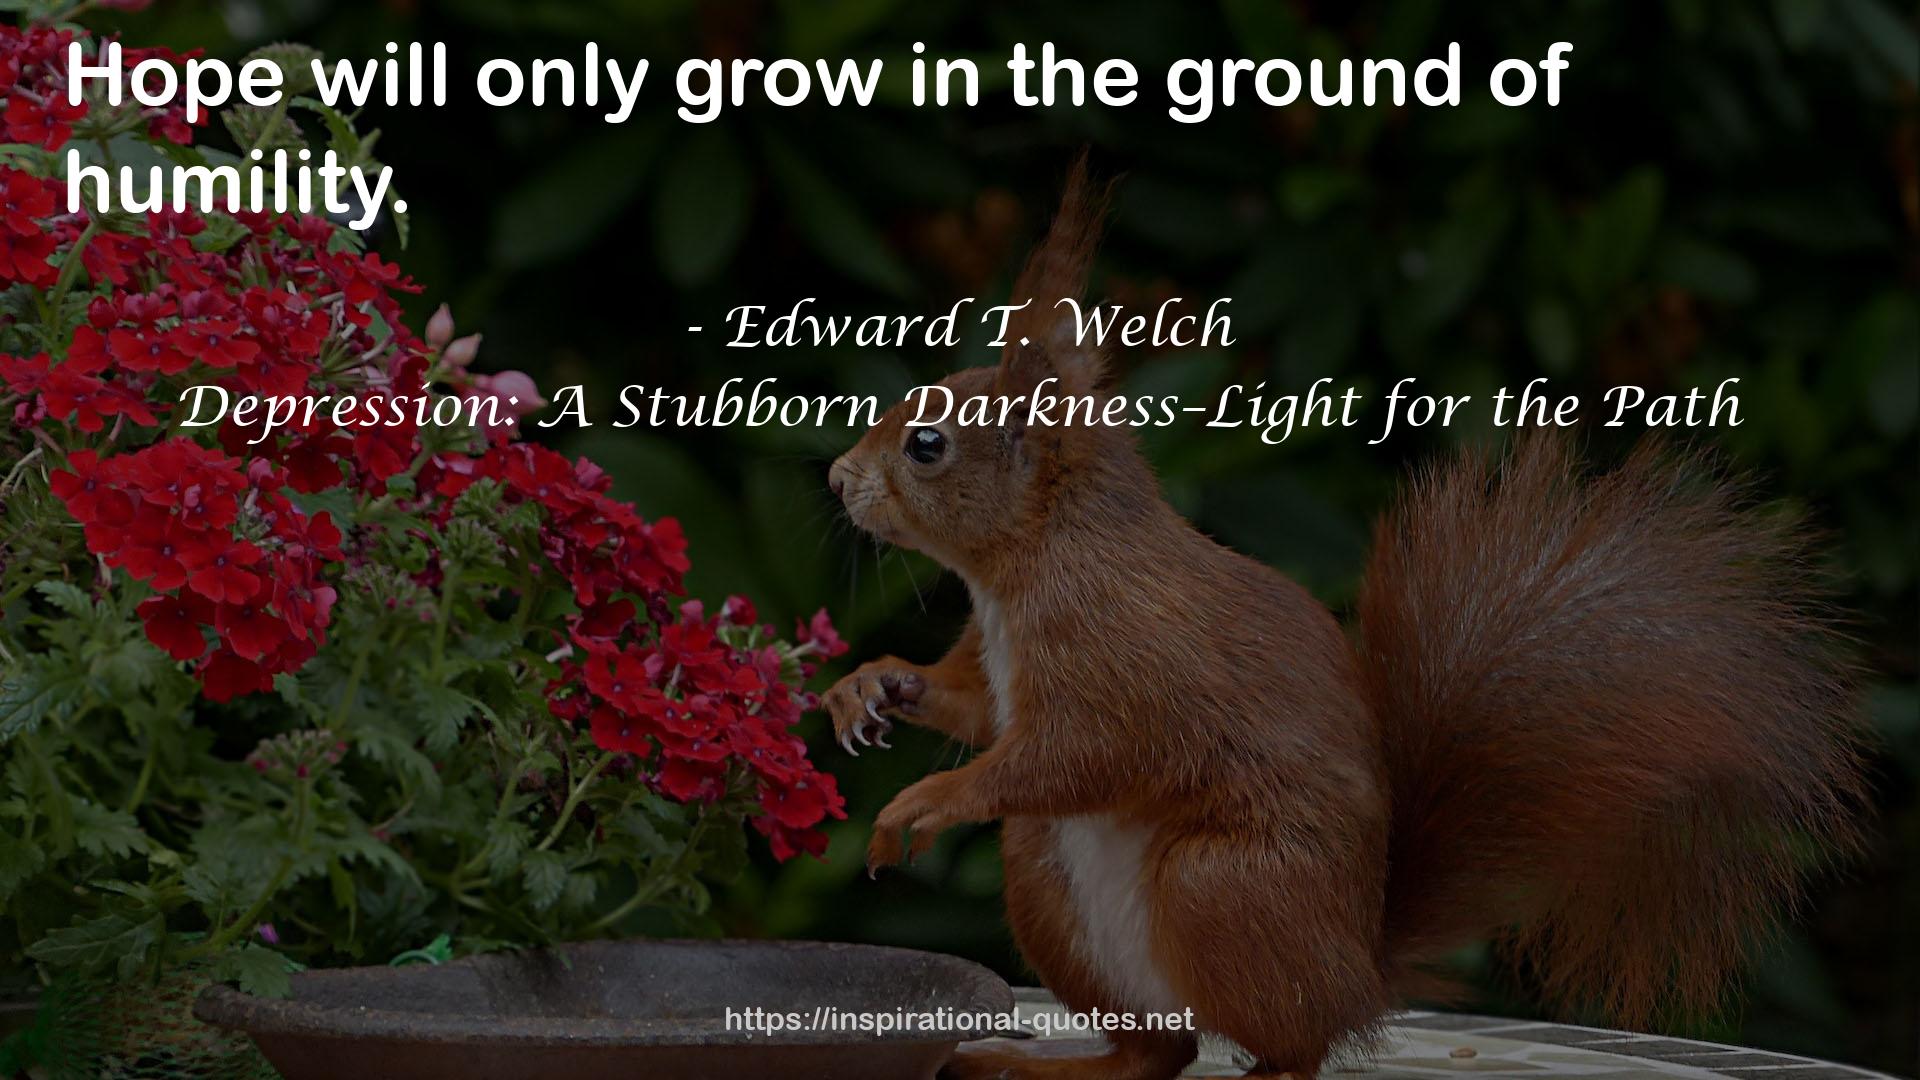 Depression: A Stubborn Darkness–Light for the Path QUOTES